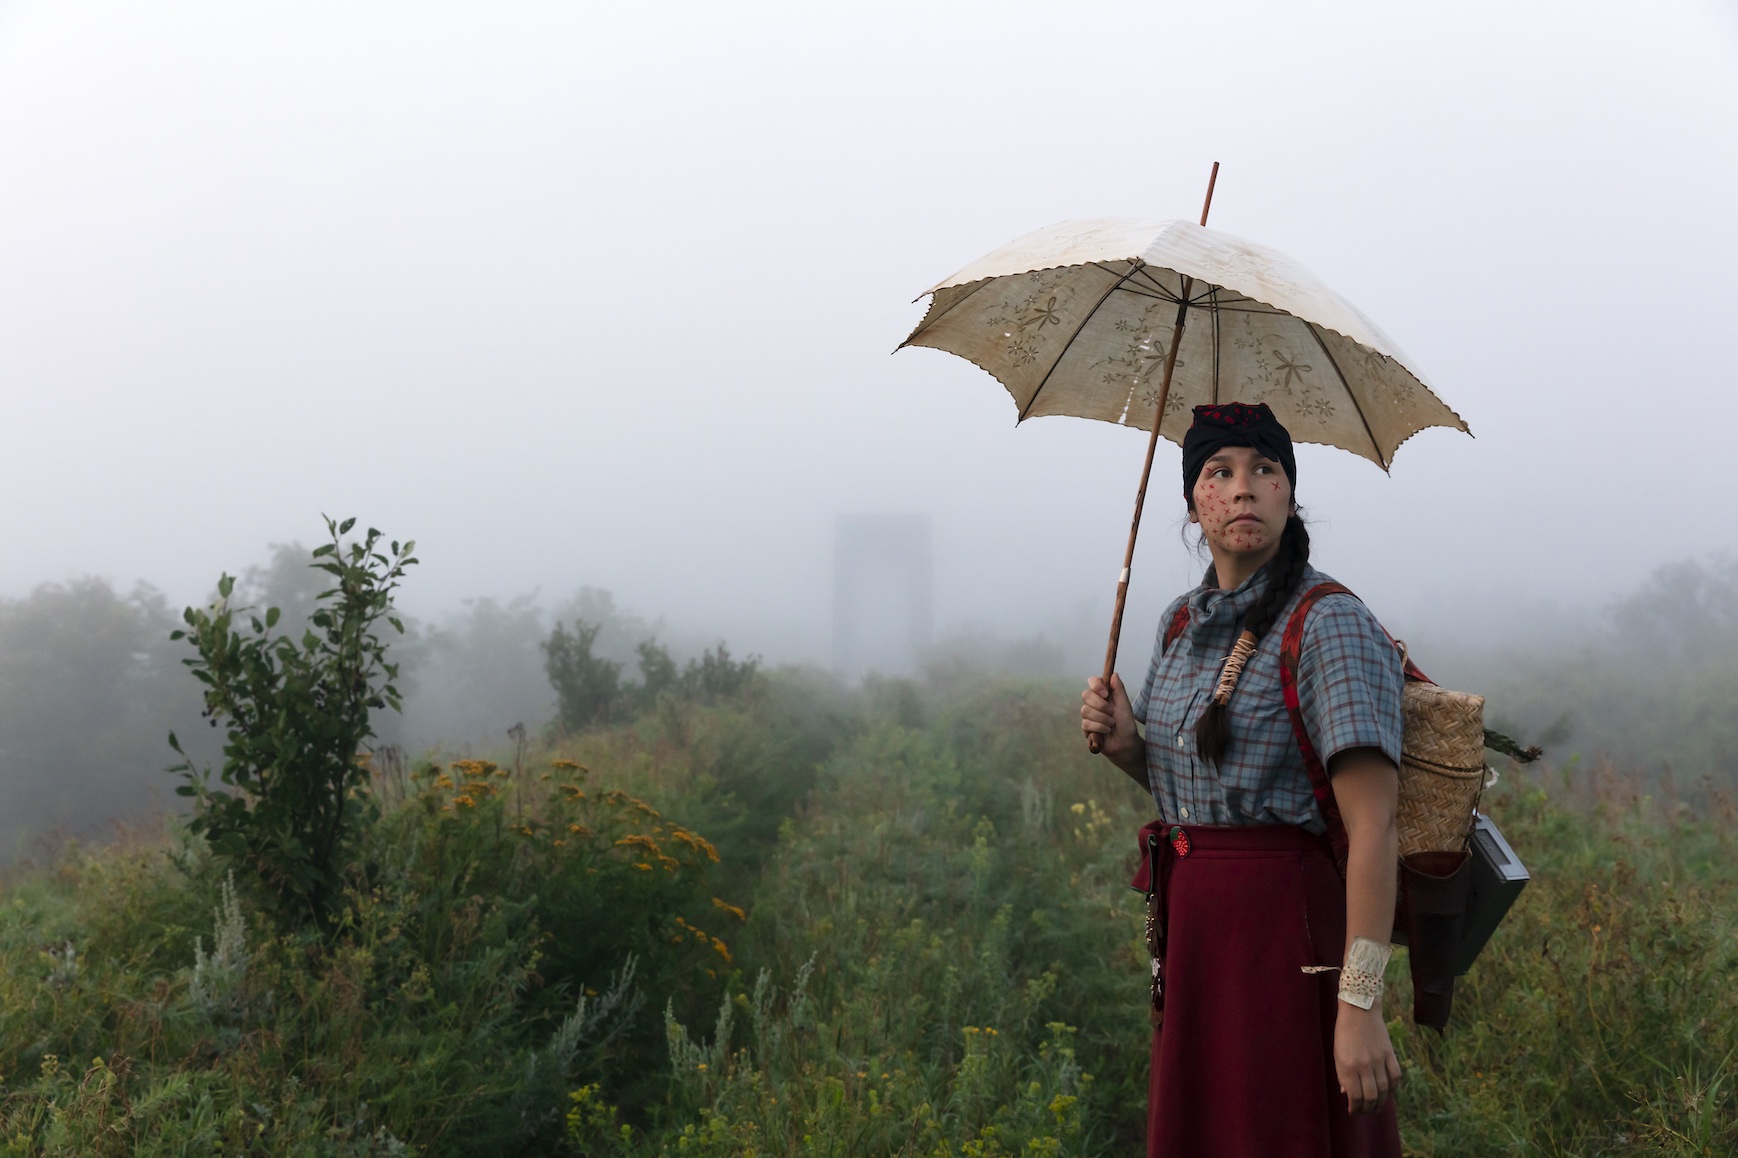 Self portrait of artist Meryl McMaster standing in a field in the fog with an umbrella